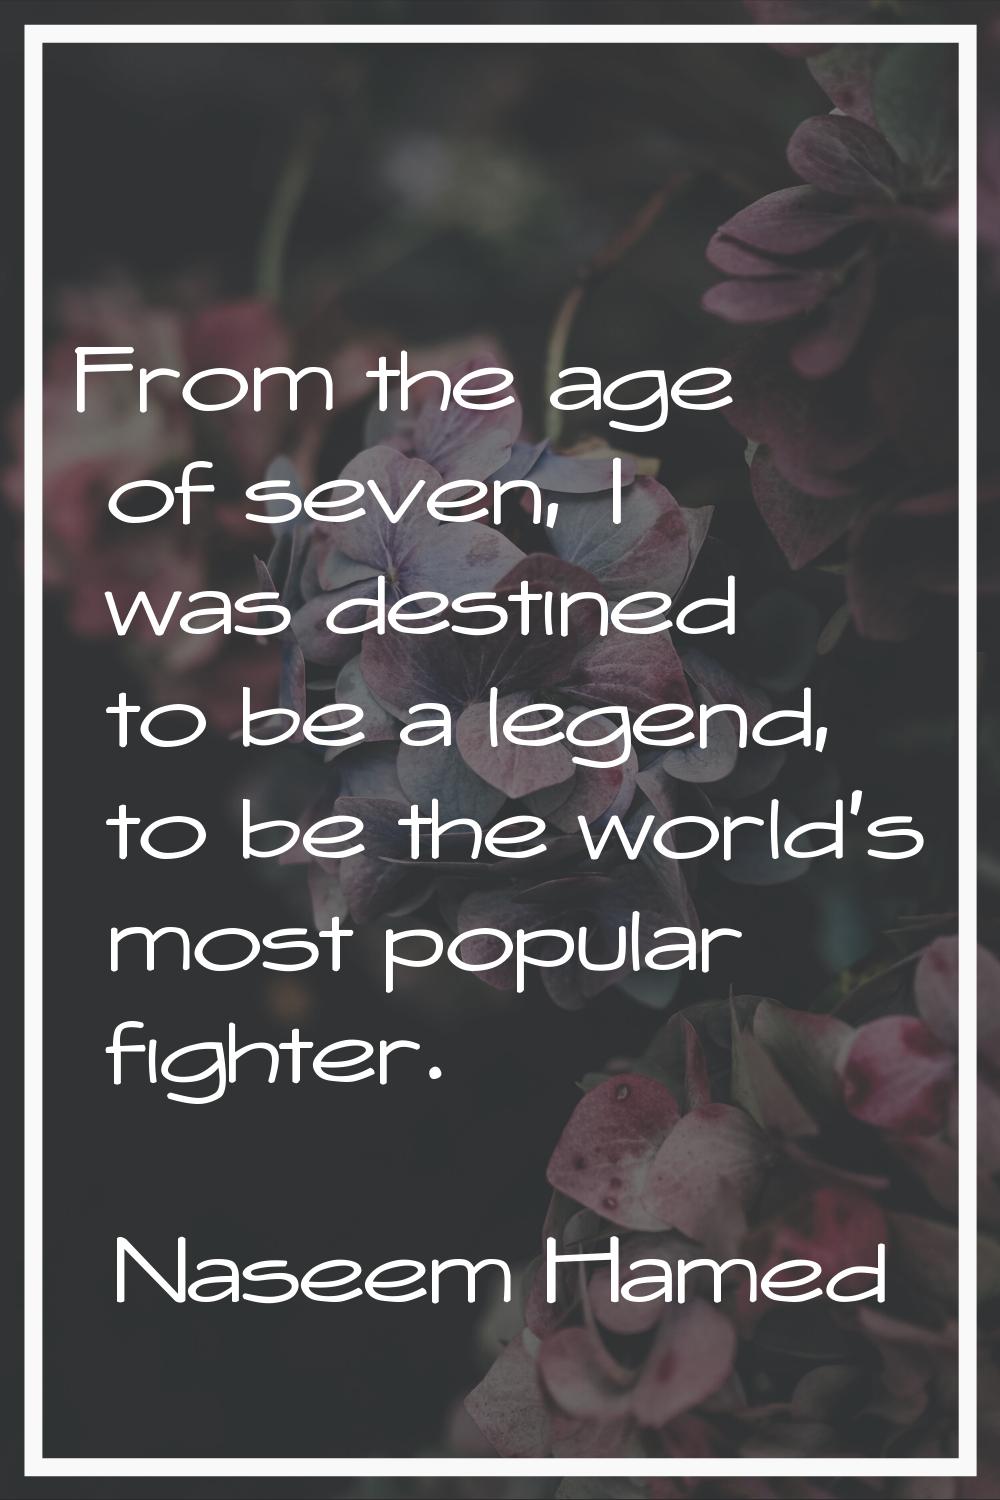 From the age of seven, I was destined to be a legend, to be the world's most popular fighter.